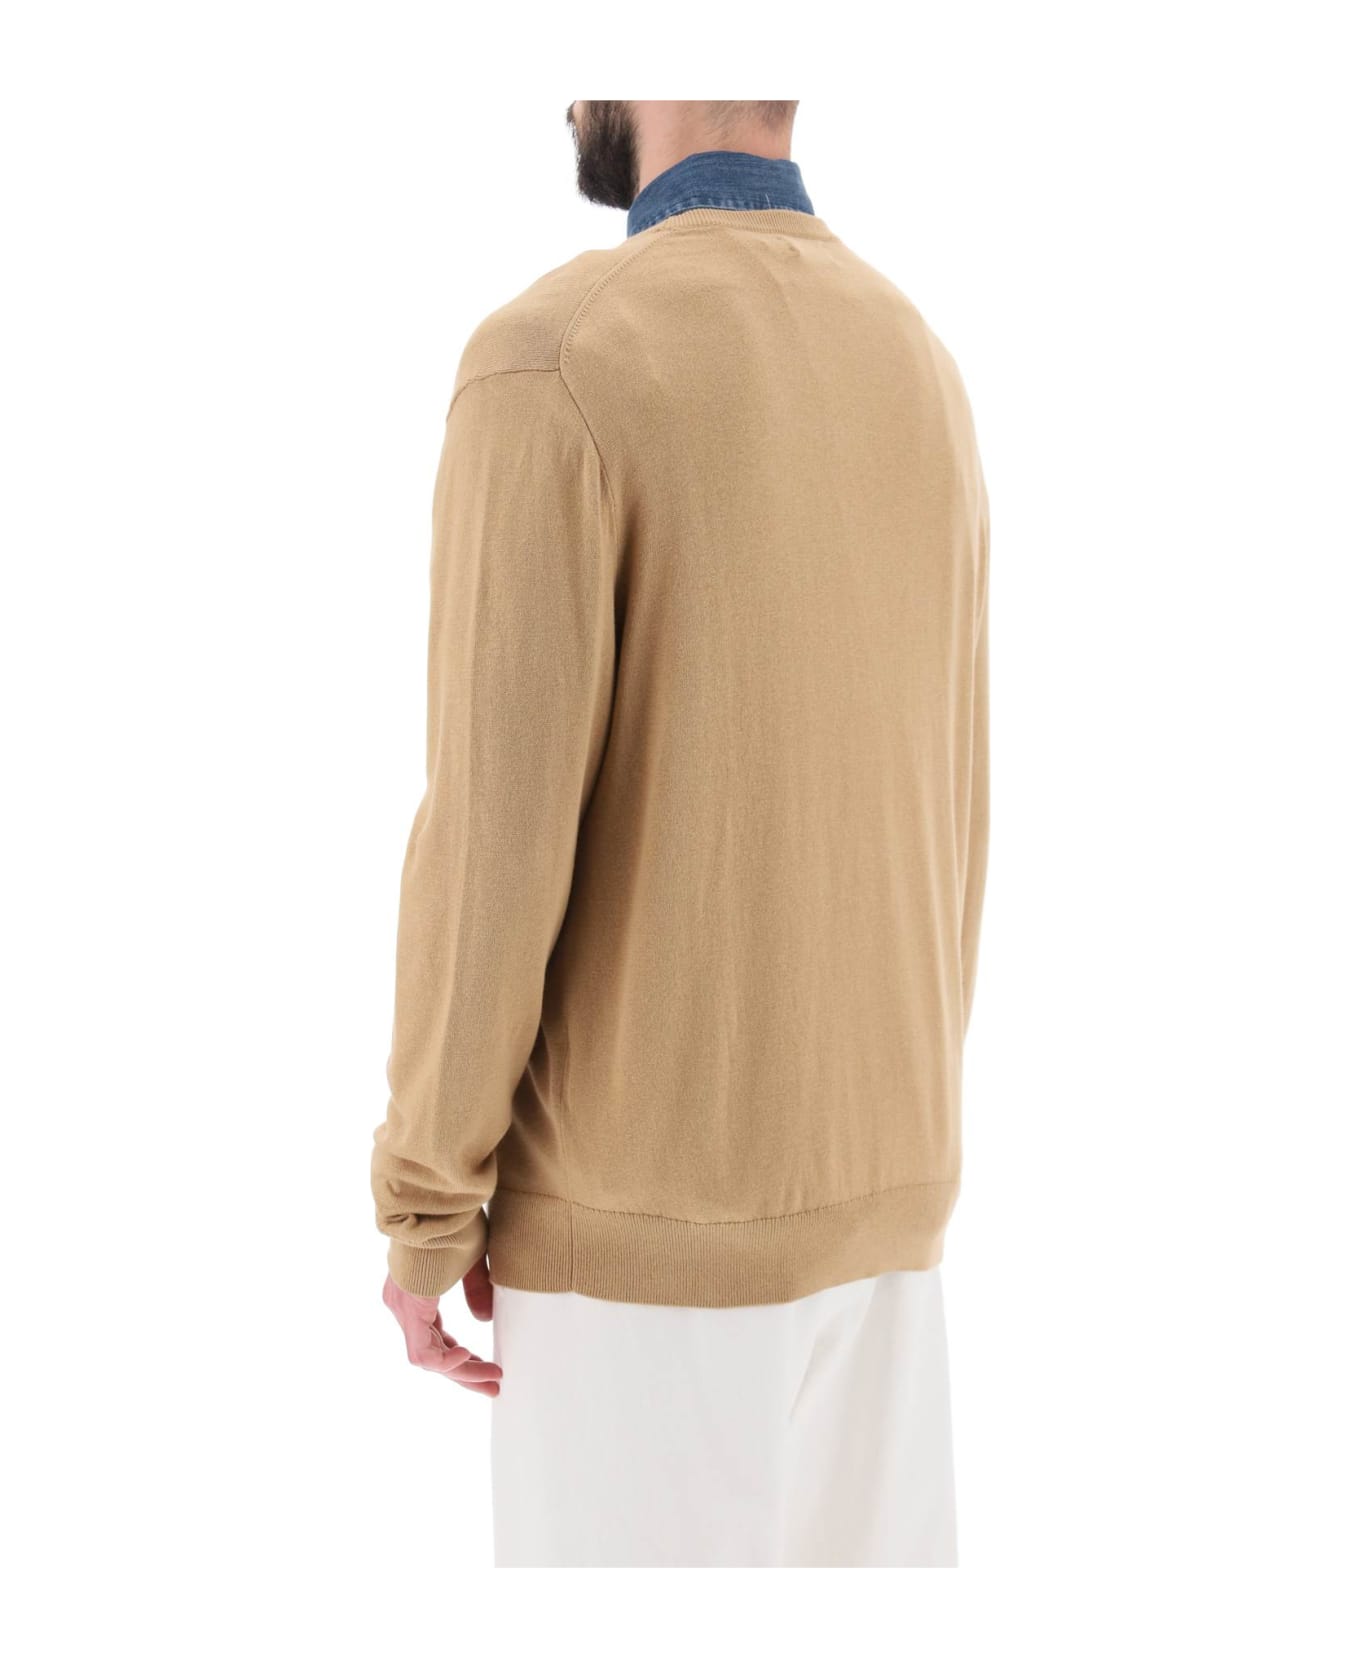 Polo Ralph Lauren Sweater In Cotton And Cashmere - BURLAP TAN (Beige)